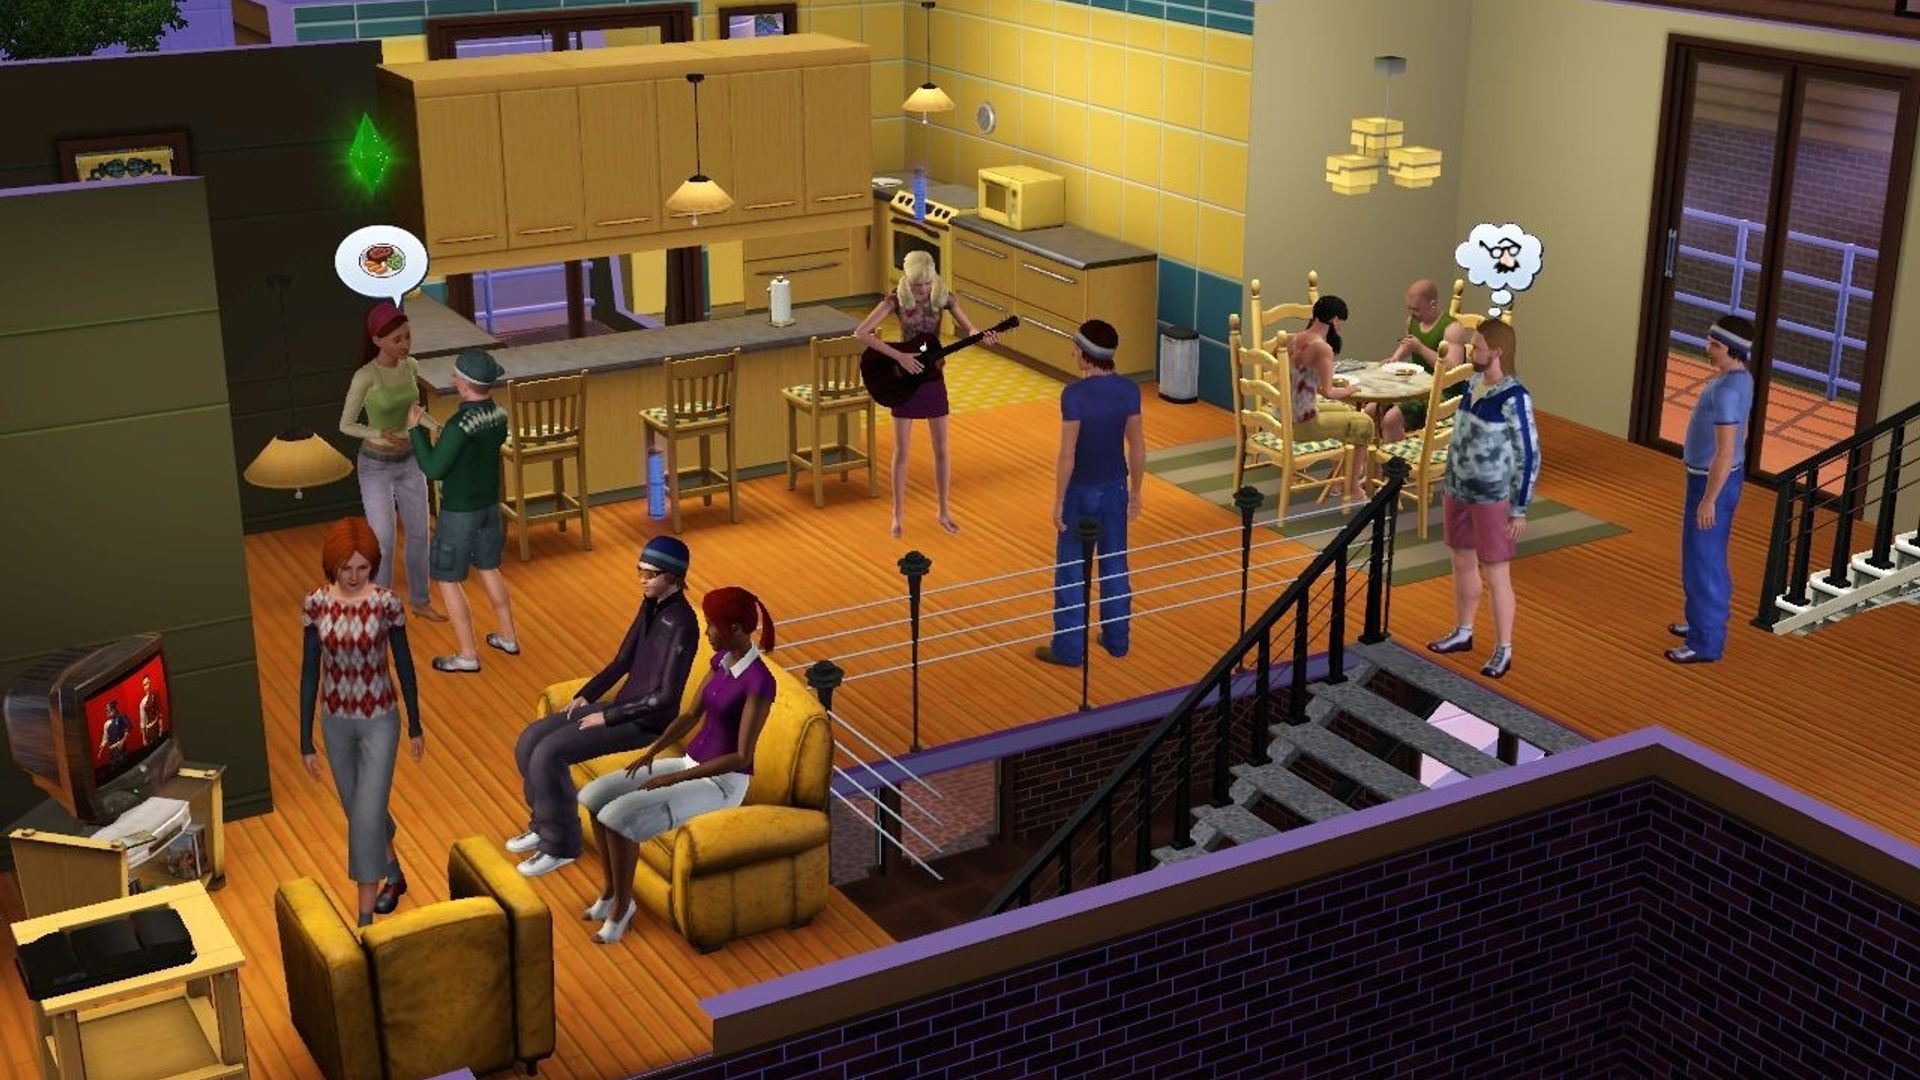 A typical evening in The Sims 3